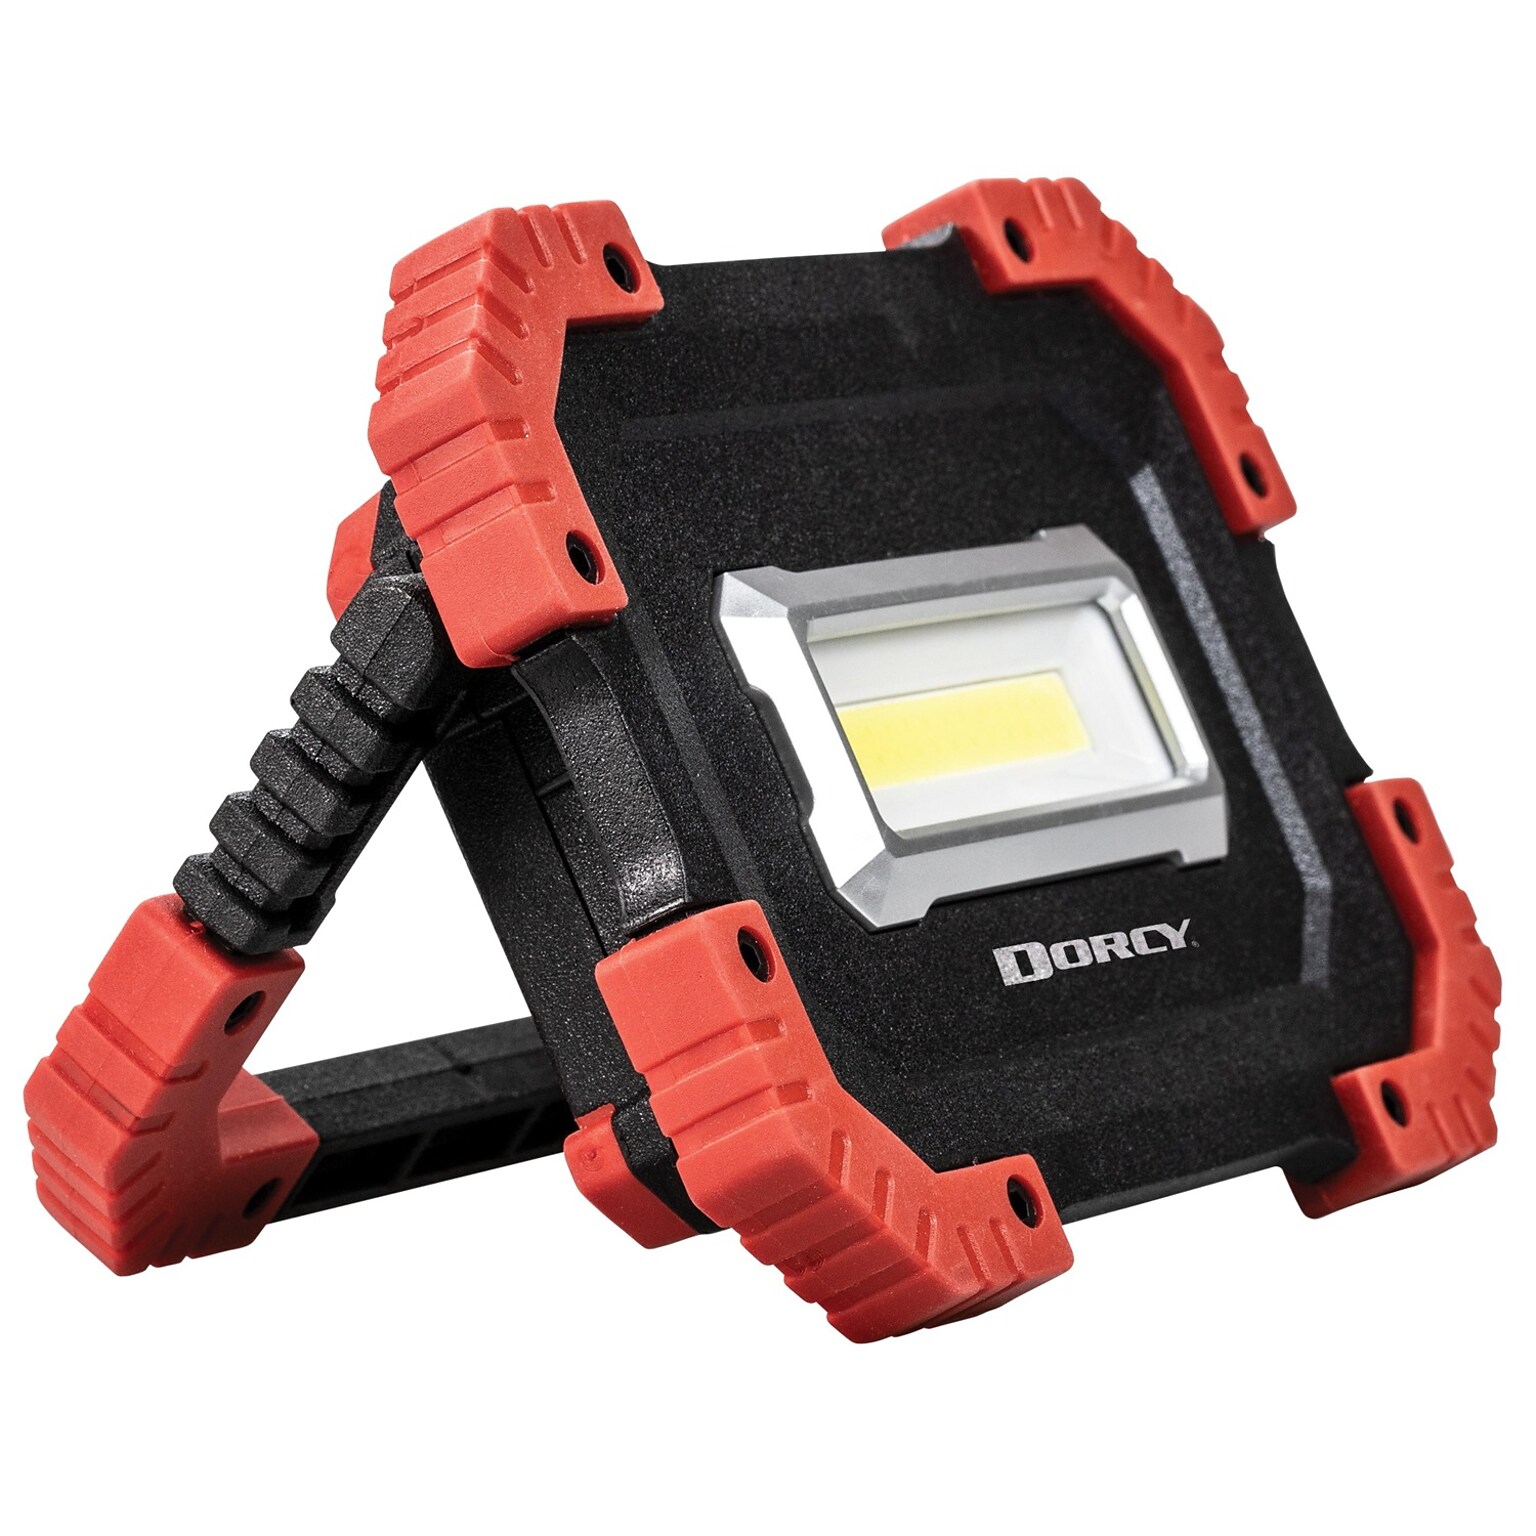 Dorcy Ultra USB 8 in. LED Rechargeable Work Light Lantern with Power Bank, Black/Red (DCY414336)